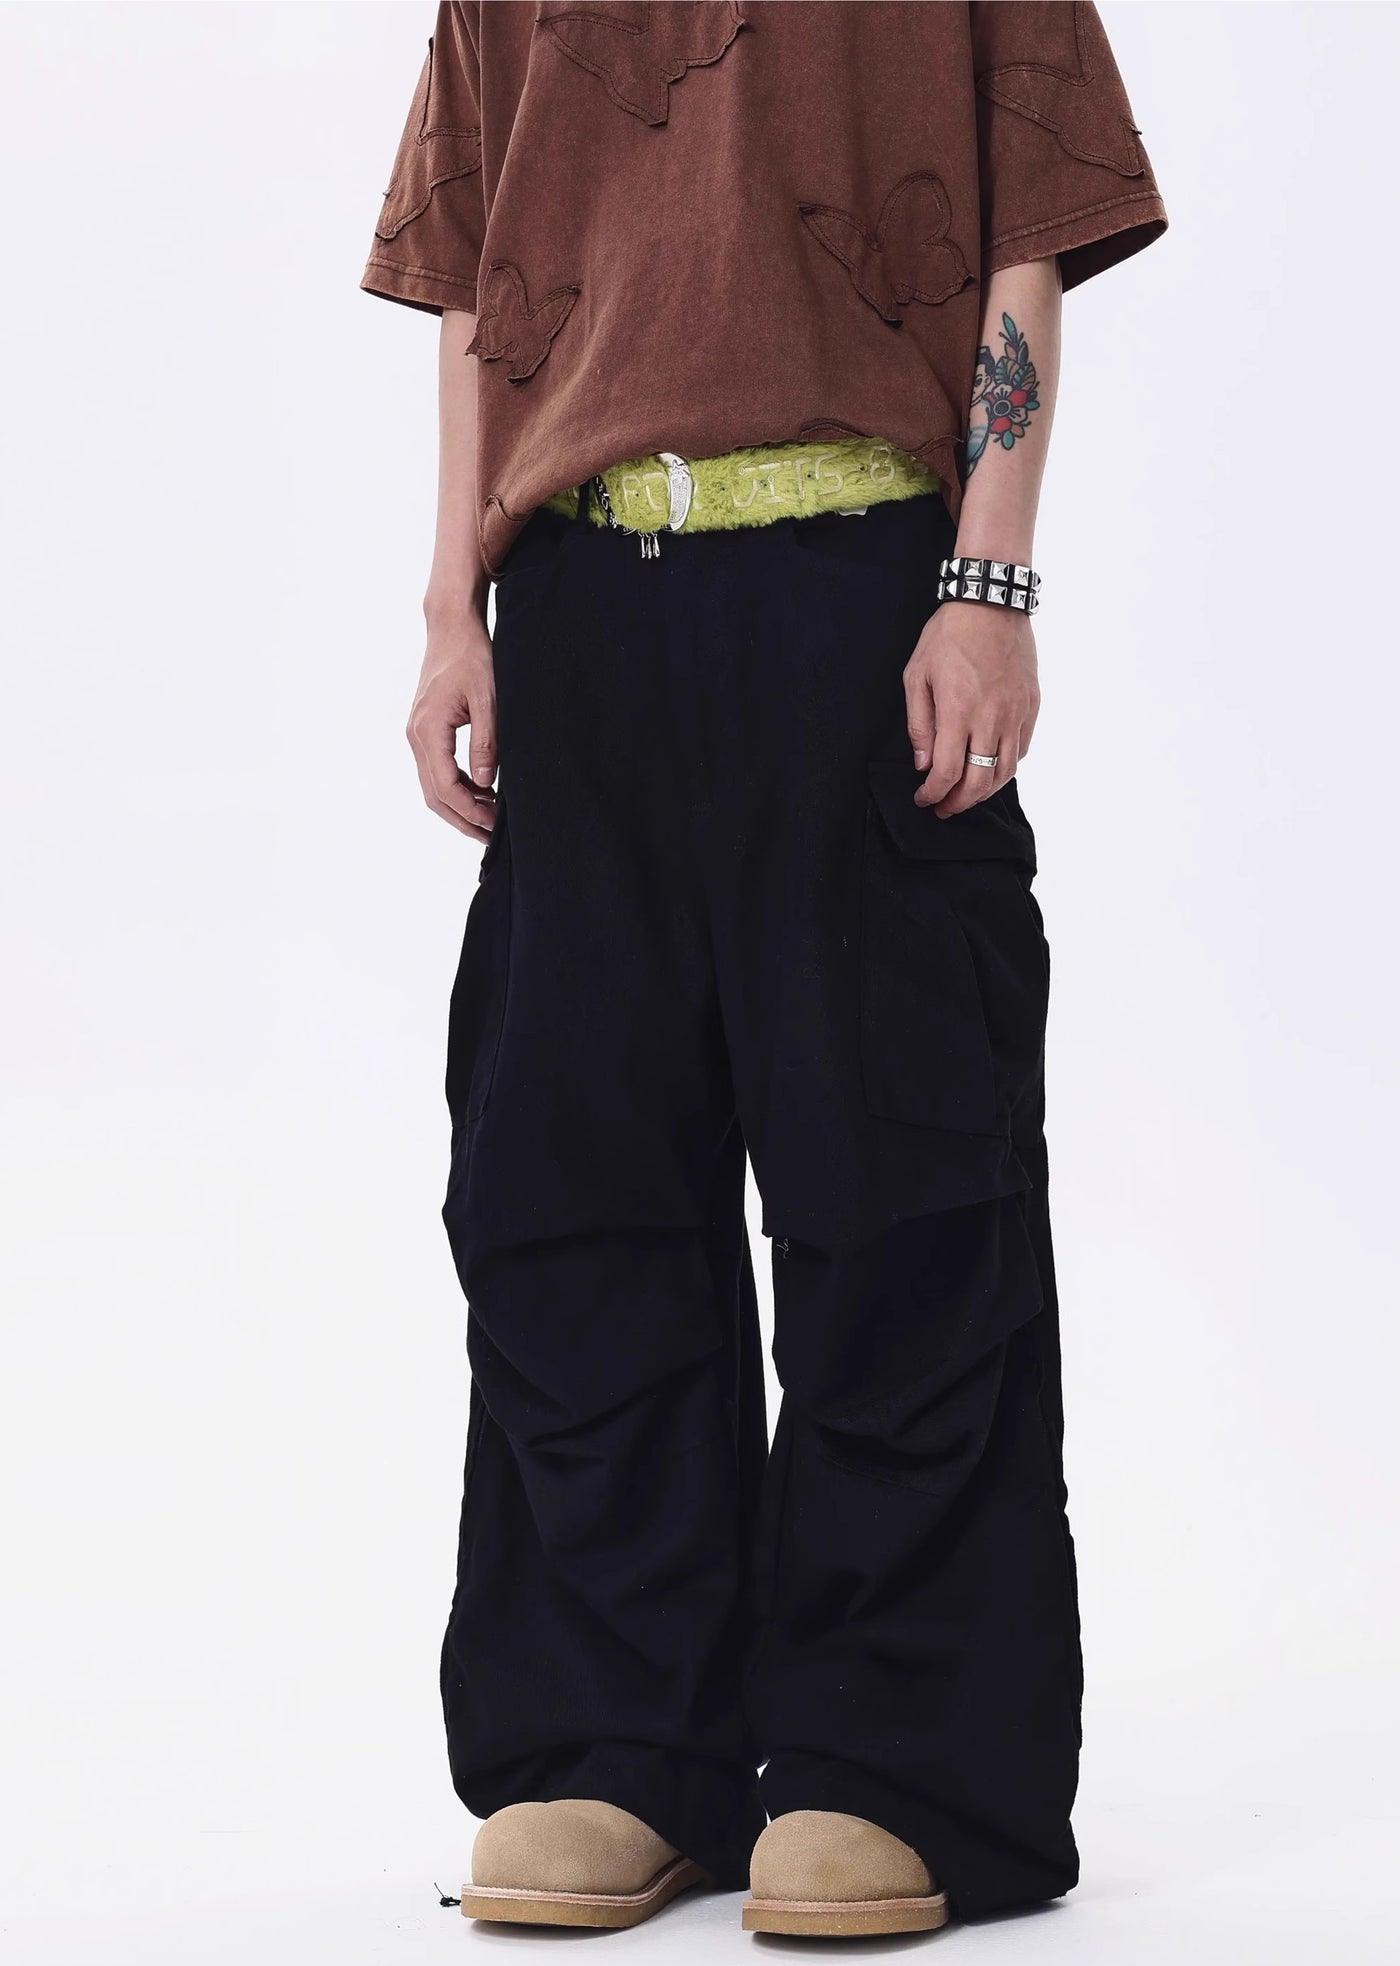 【BTSG】Simple cargo-rise pants with a relaxed silhouette design pants  BS0020